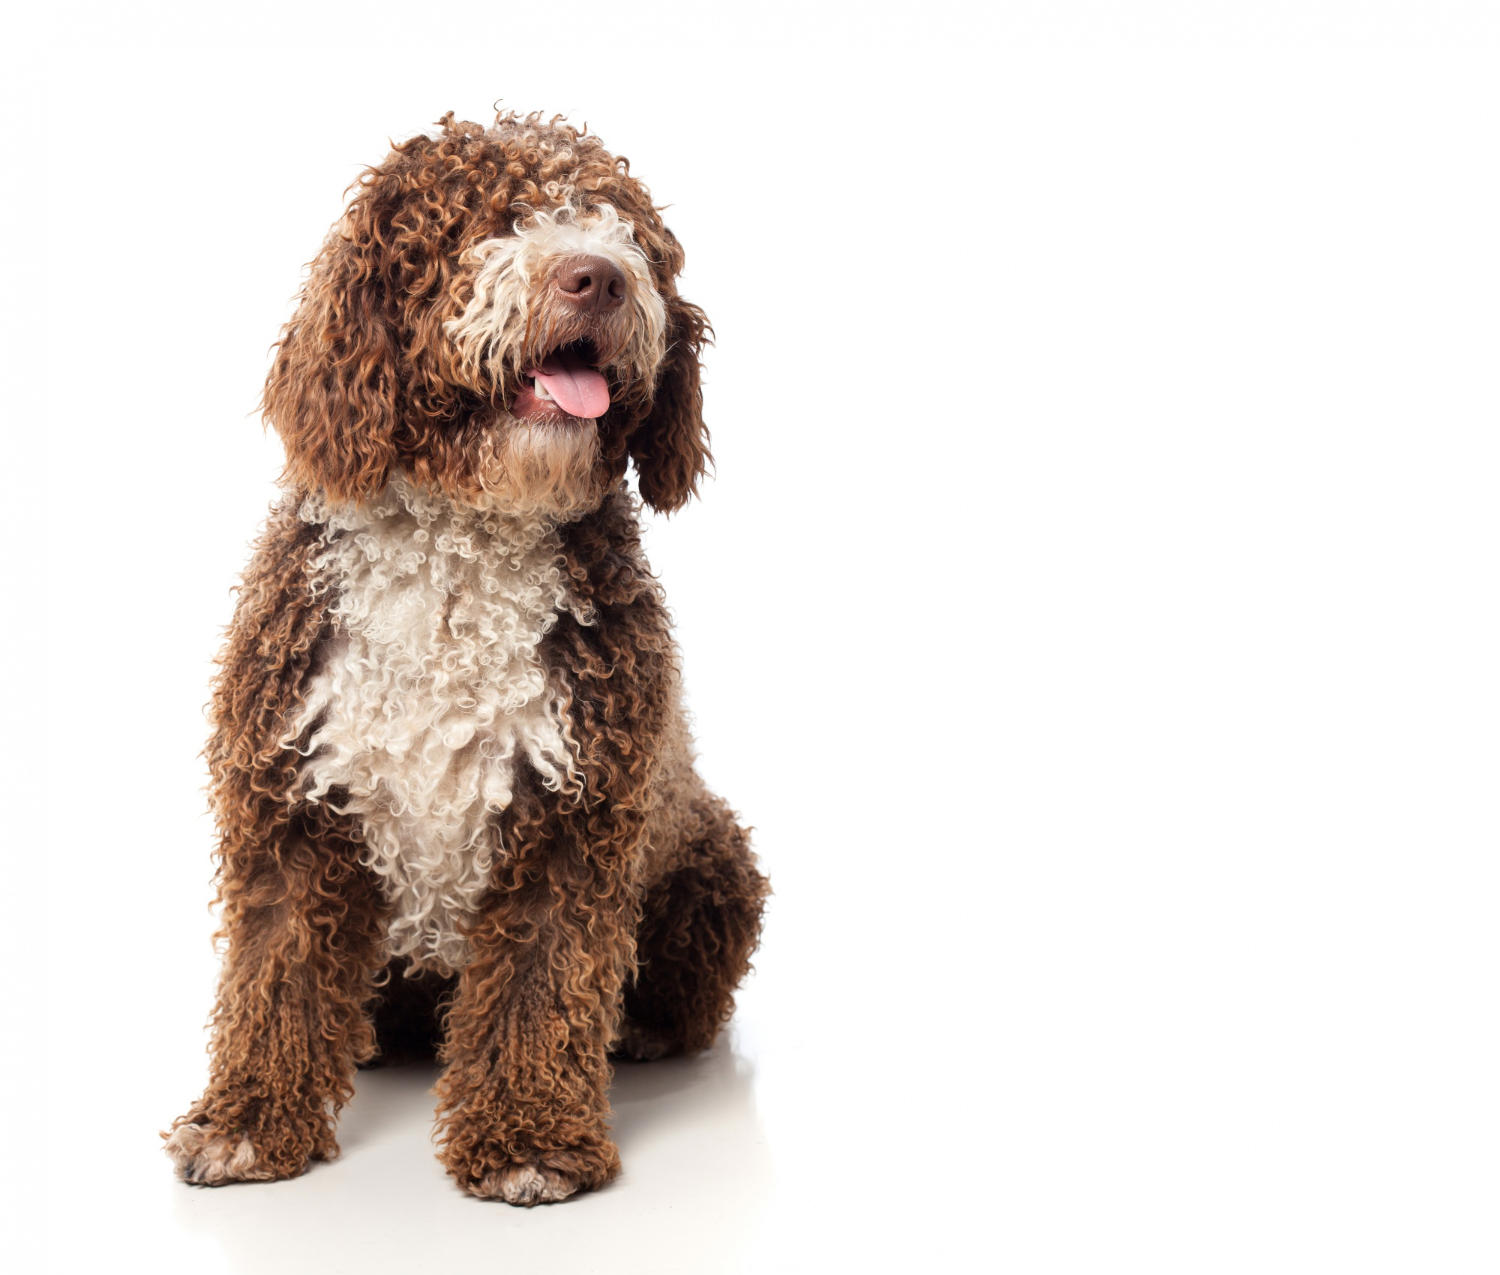 "The Ultimate Guide to Finding the Best Puppy Food for Goldendoodles"